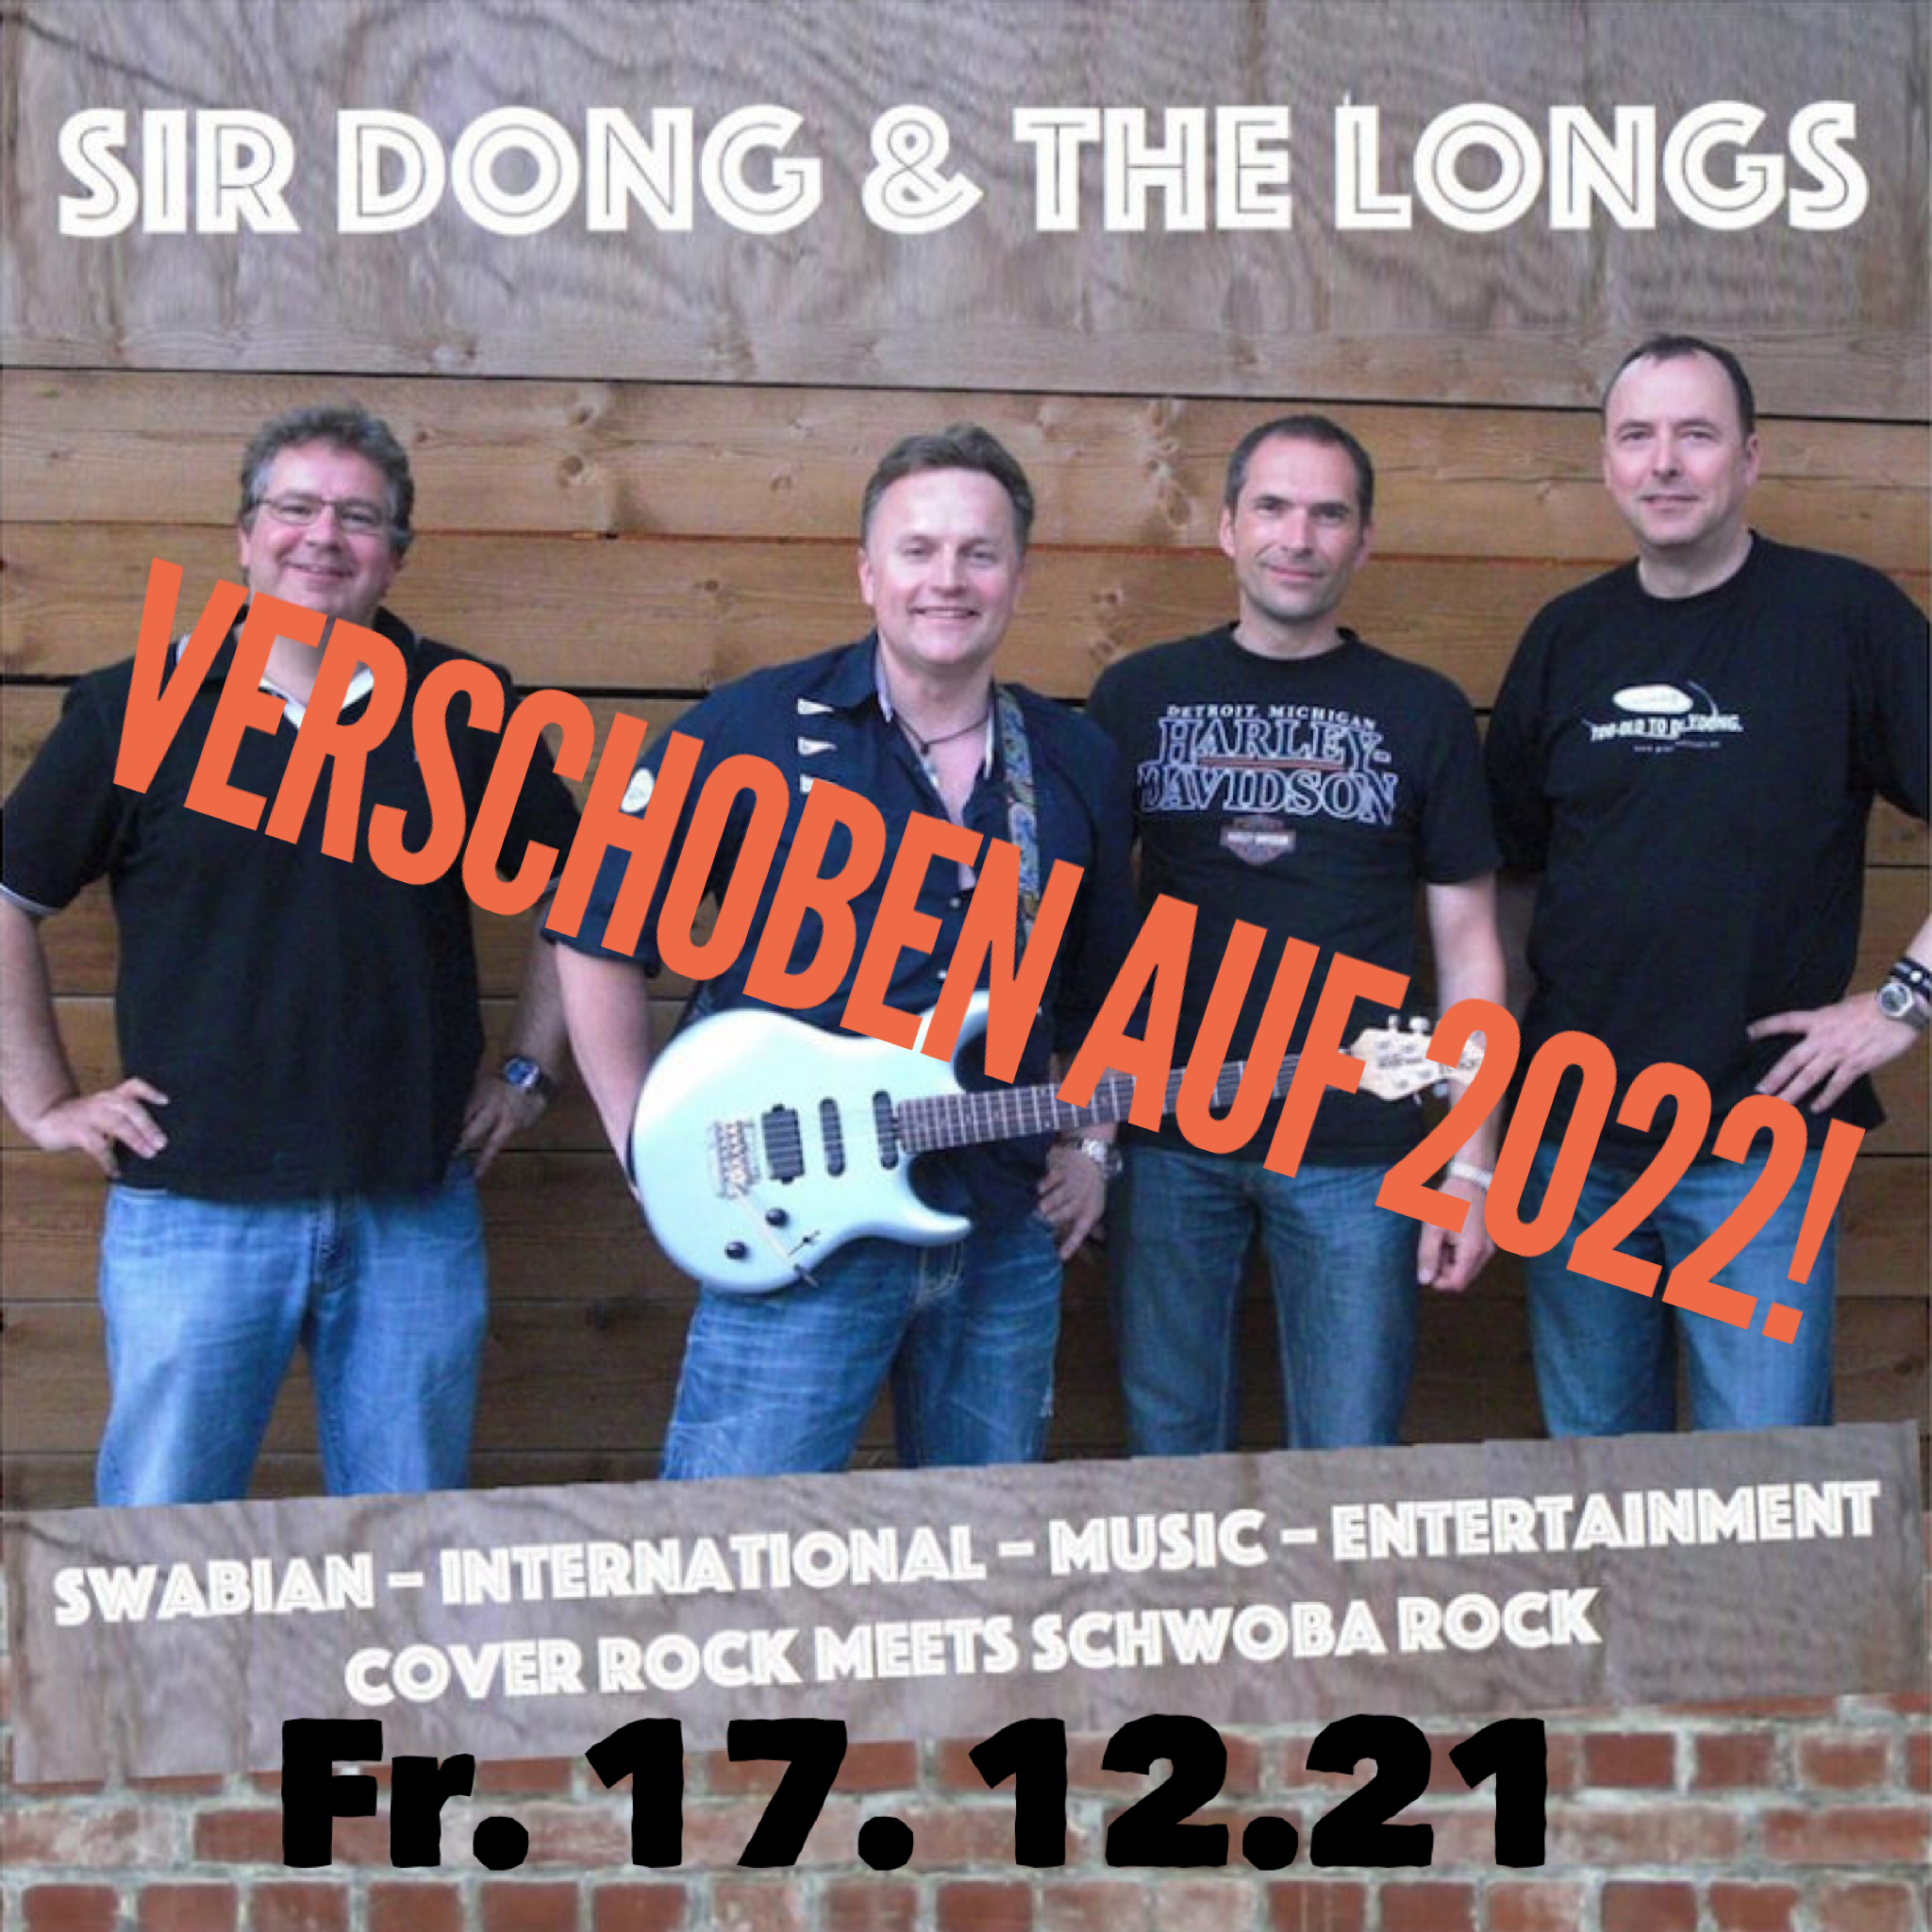 SIR DONG & the LONGS – Weihnachtsspecial – abgesagt!